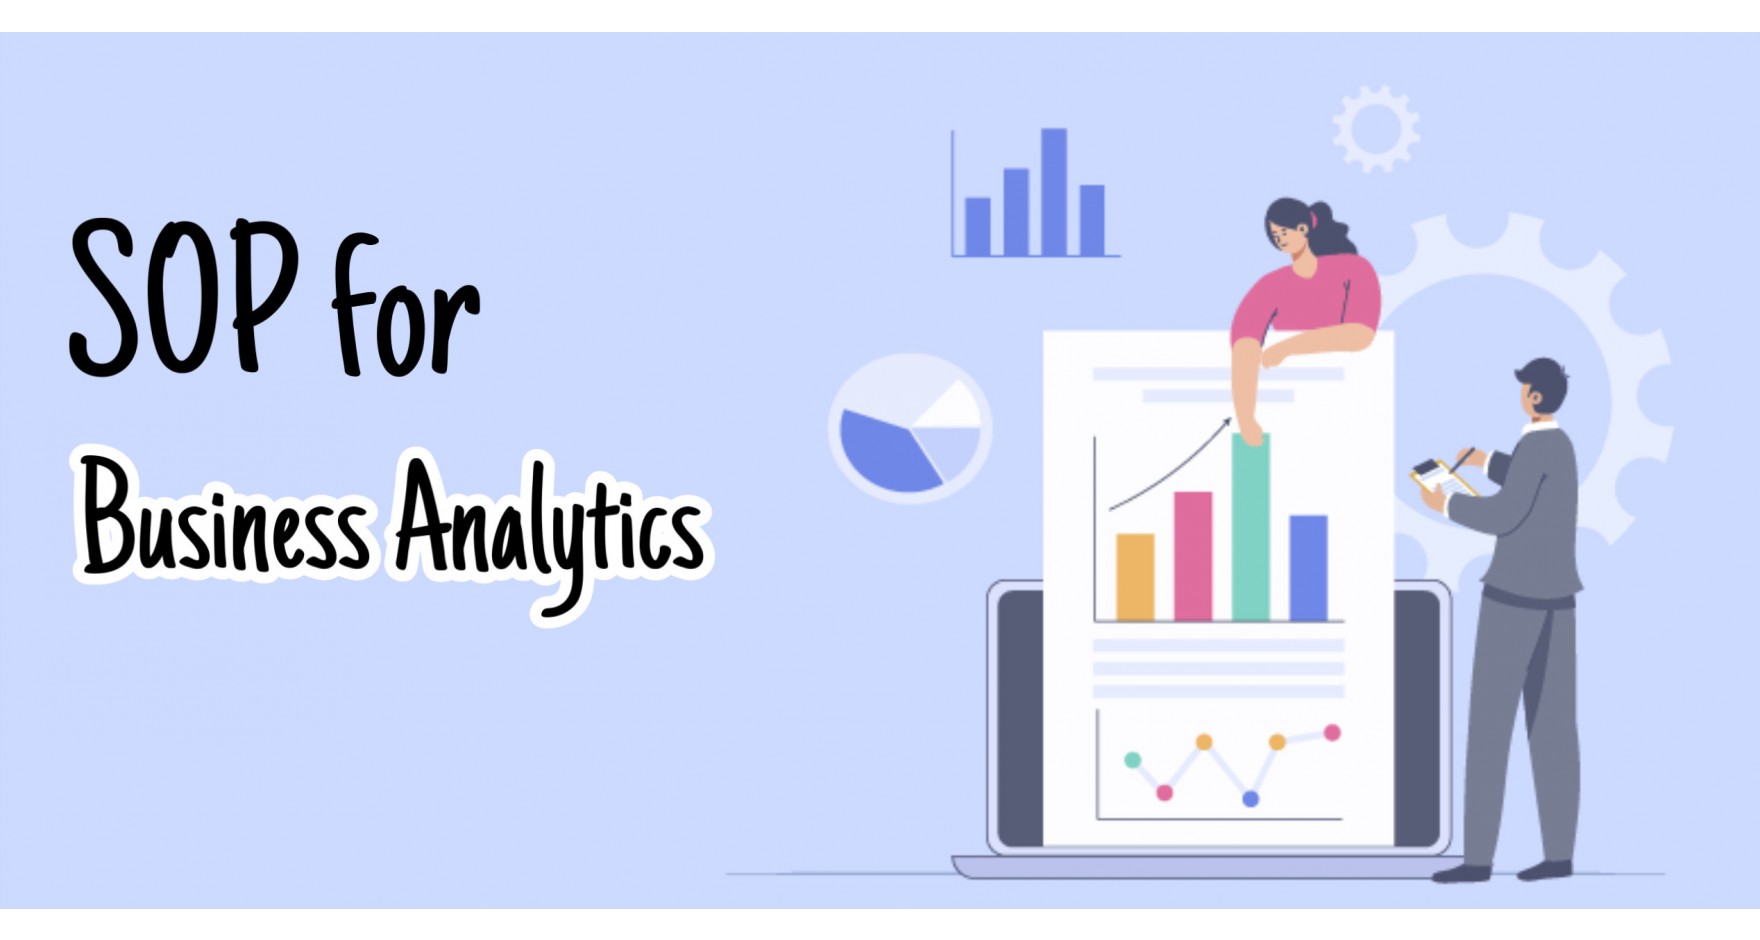 How to write SOP for Business Analytics?